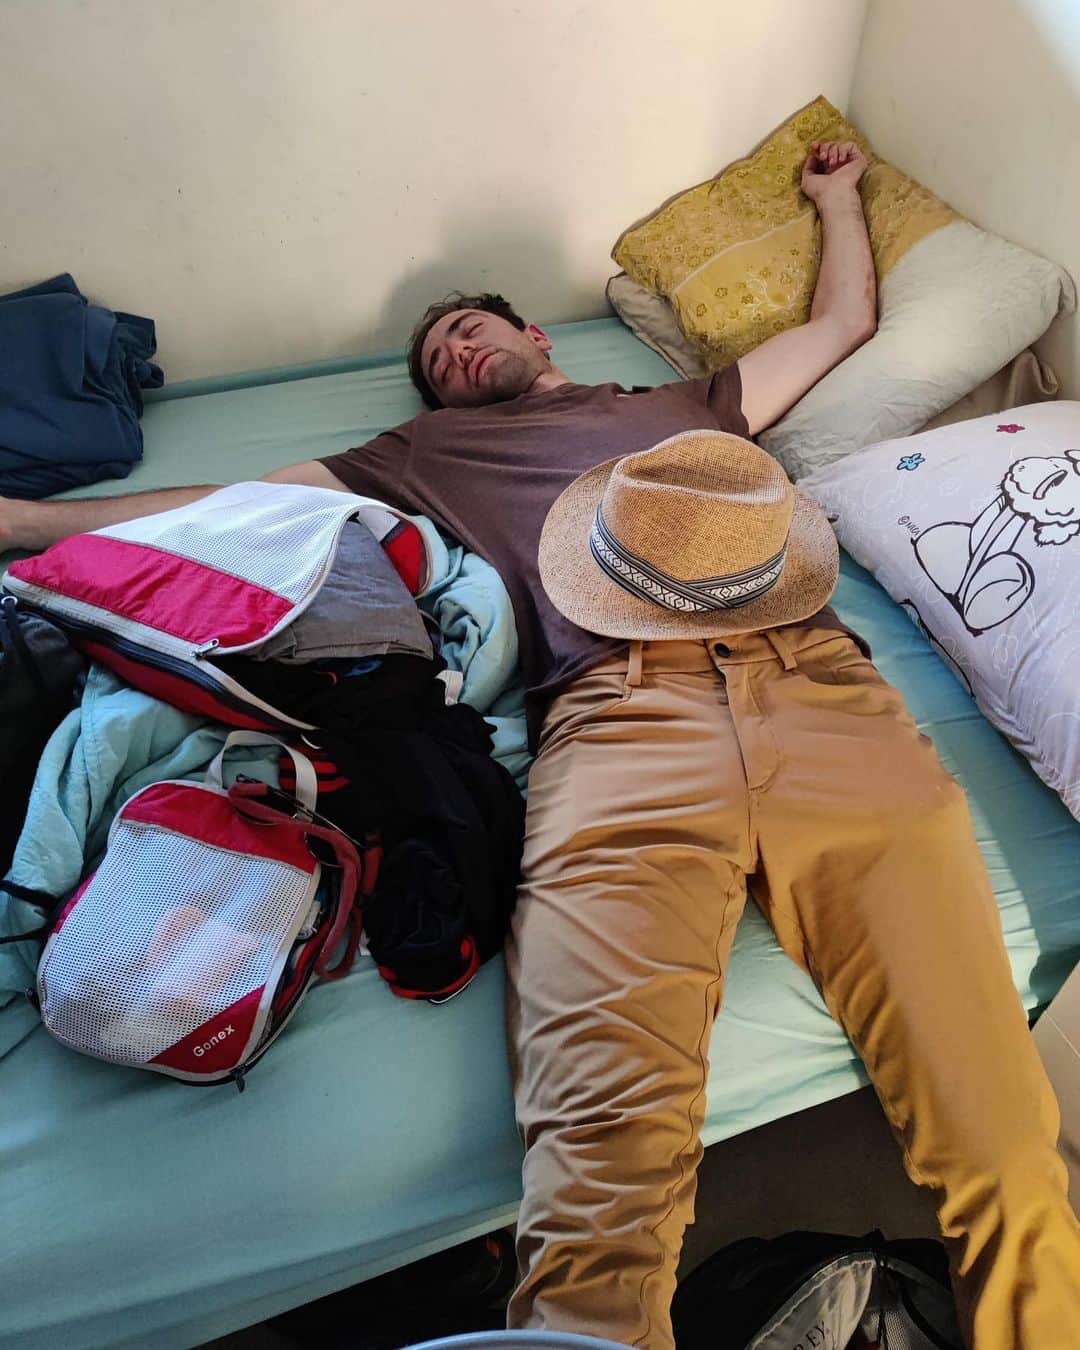 Jacob Simonのインスタグラム：「The ‘solo traveler 1 month into his trip’ look:」